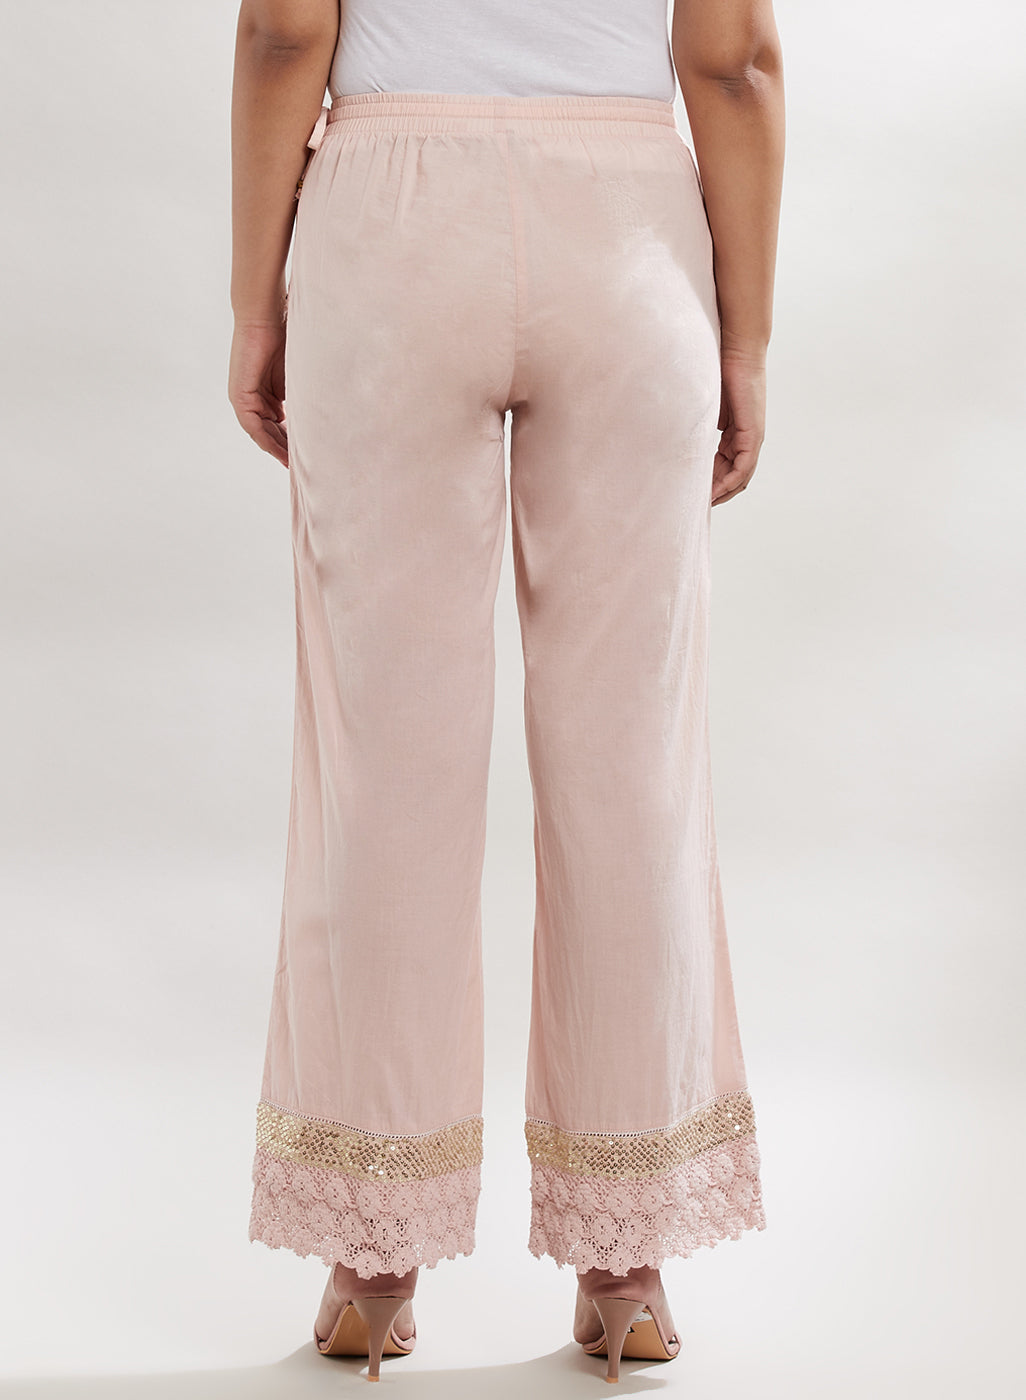 Peach Palazzos With Shimmery Details At The Hems